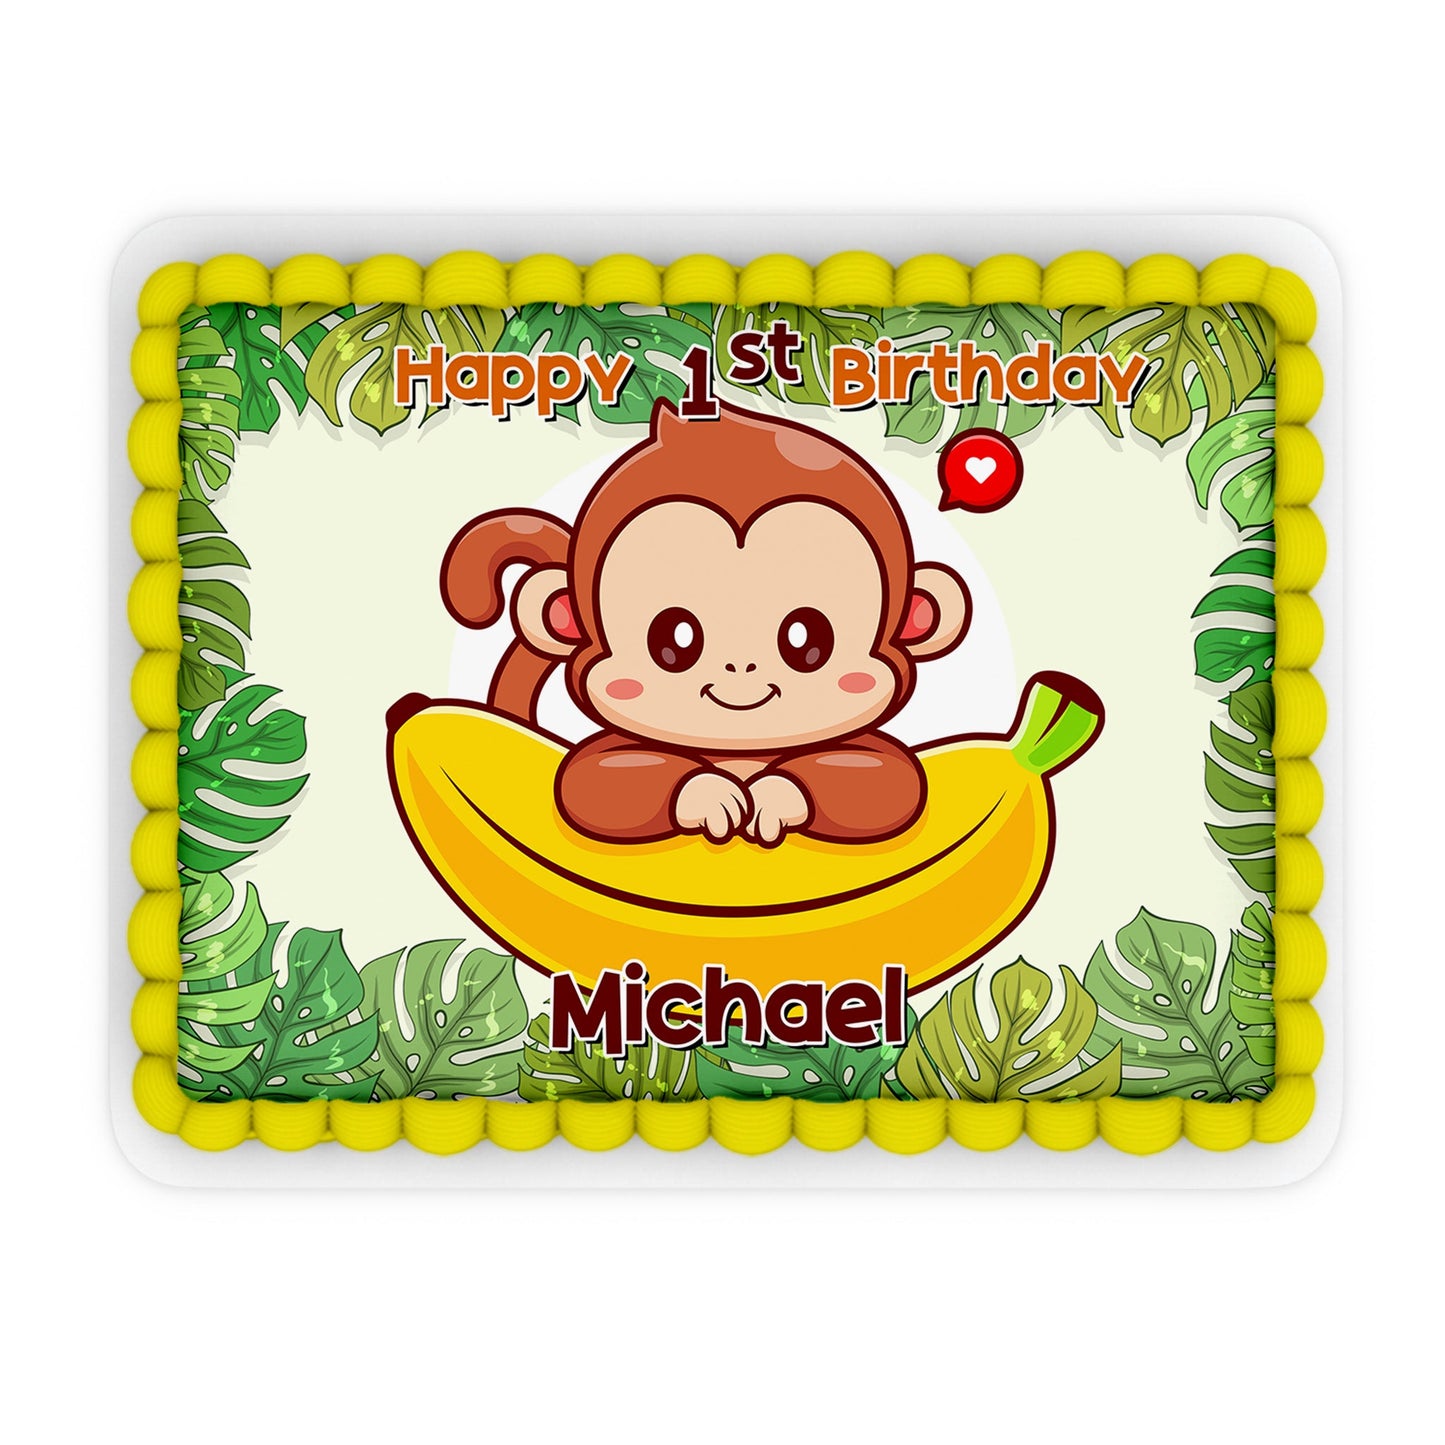 Rectangle Edible Monkey Cake Image for Custom Party Themes